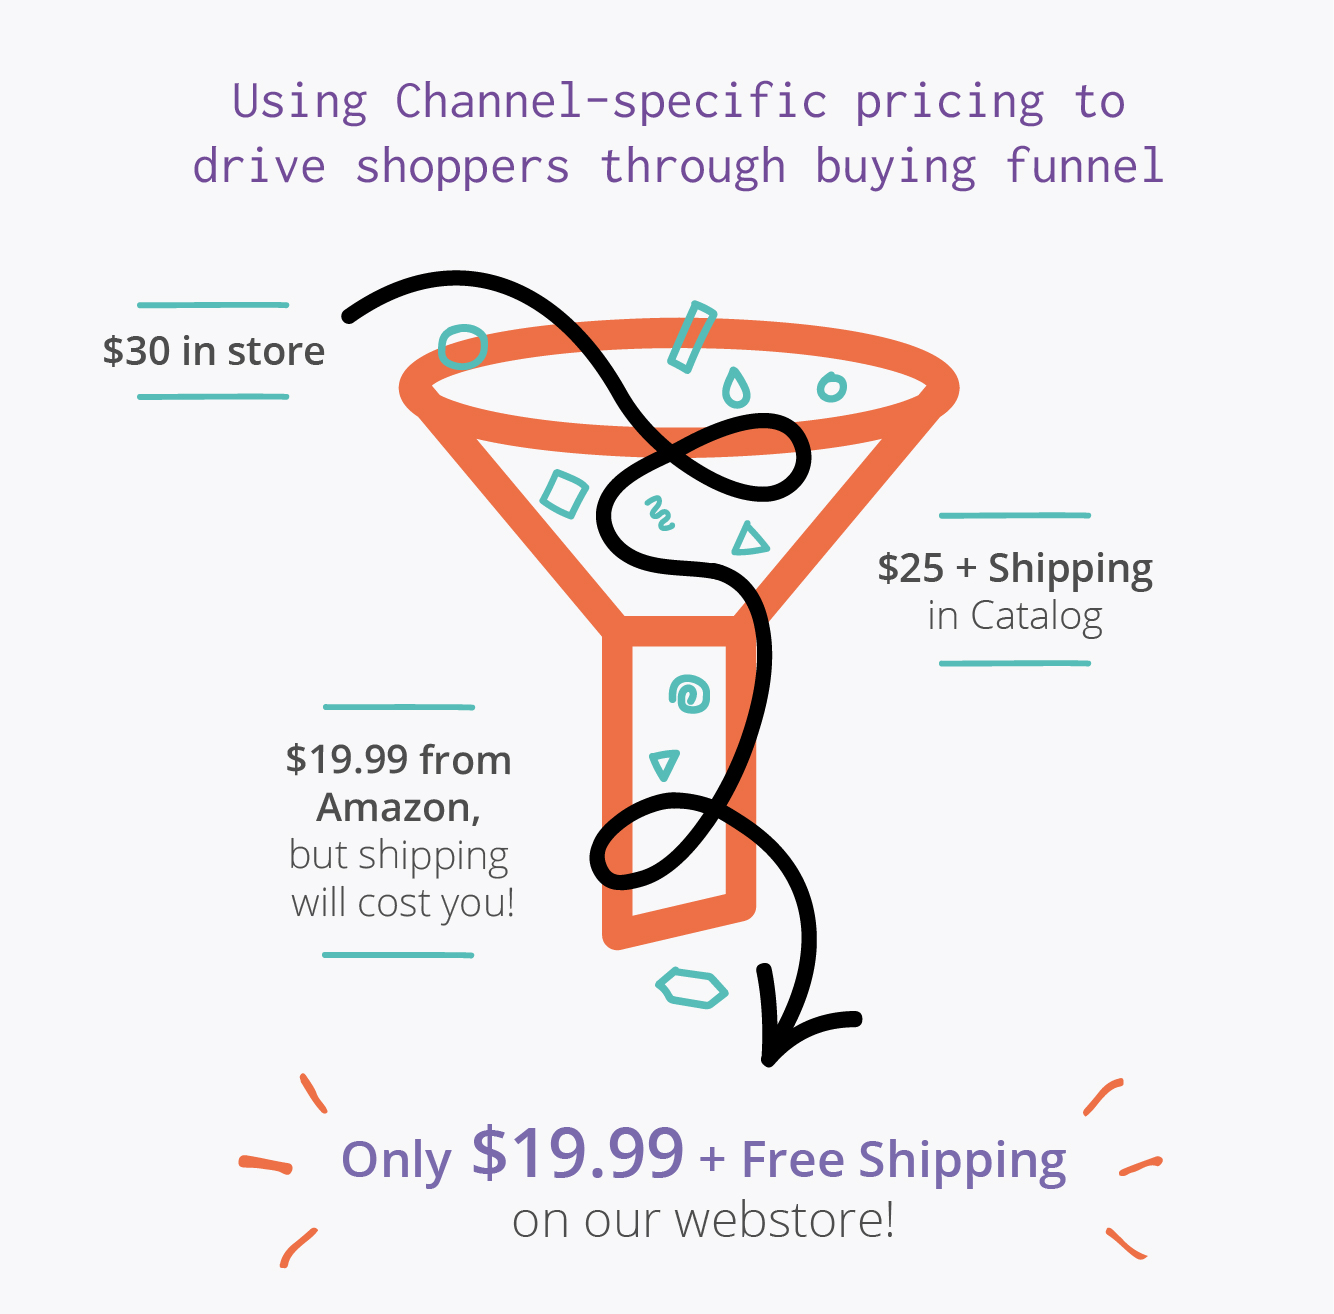 product pricing in an omnichannel environment and how to protect your margins by adding value instead of bottoming out prices.